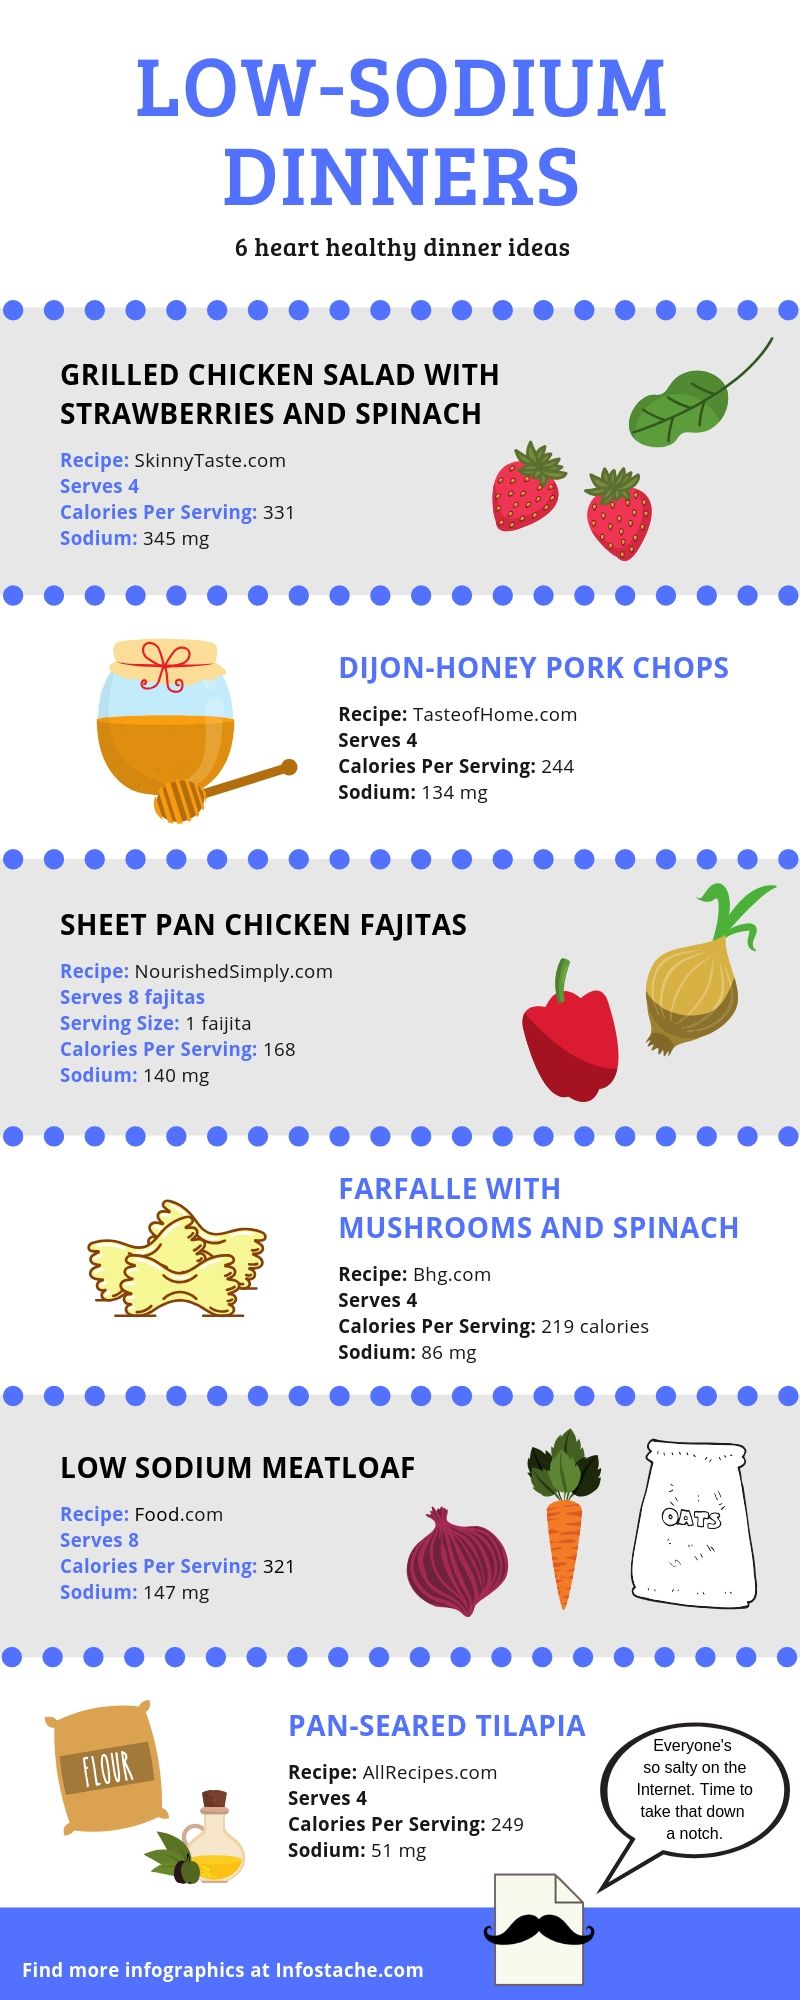 6-low-sodium-dinners-for-a-healthy-heart-infographic-infostache